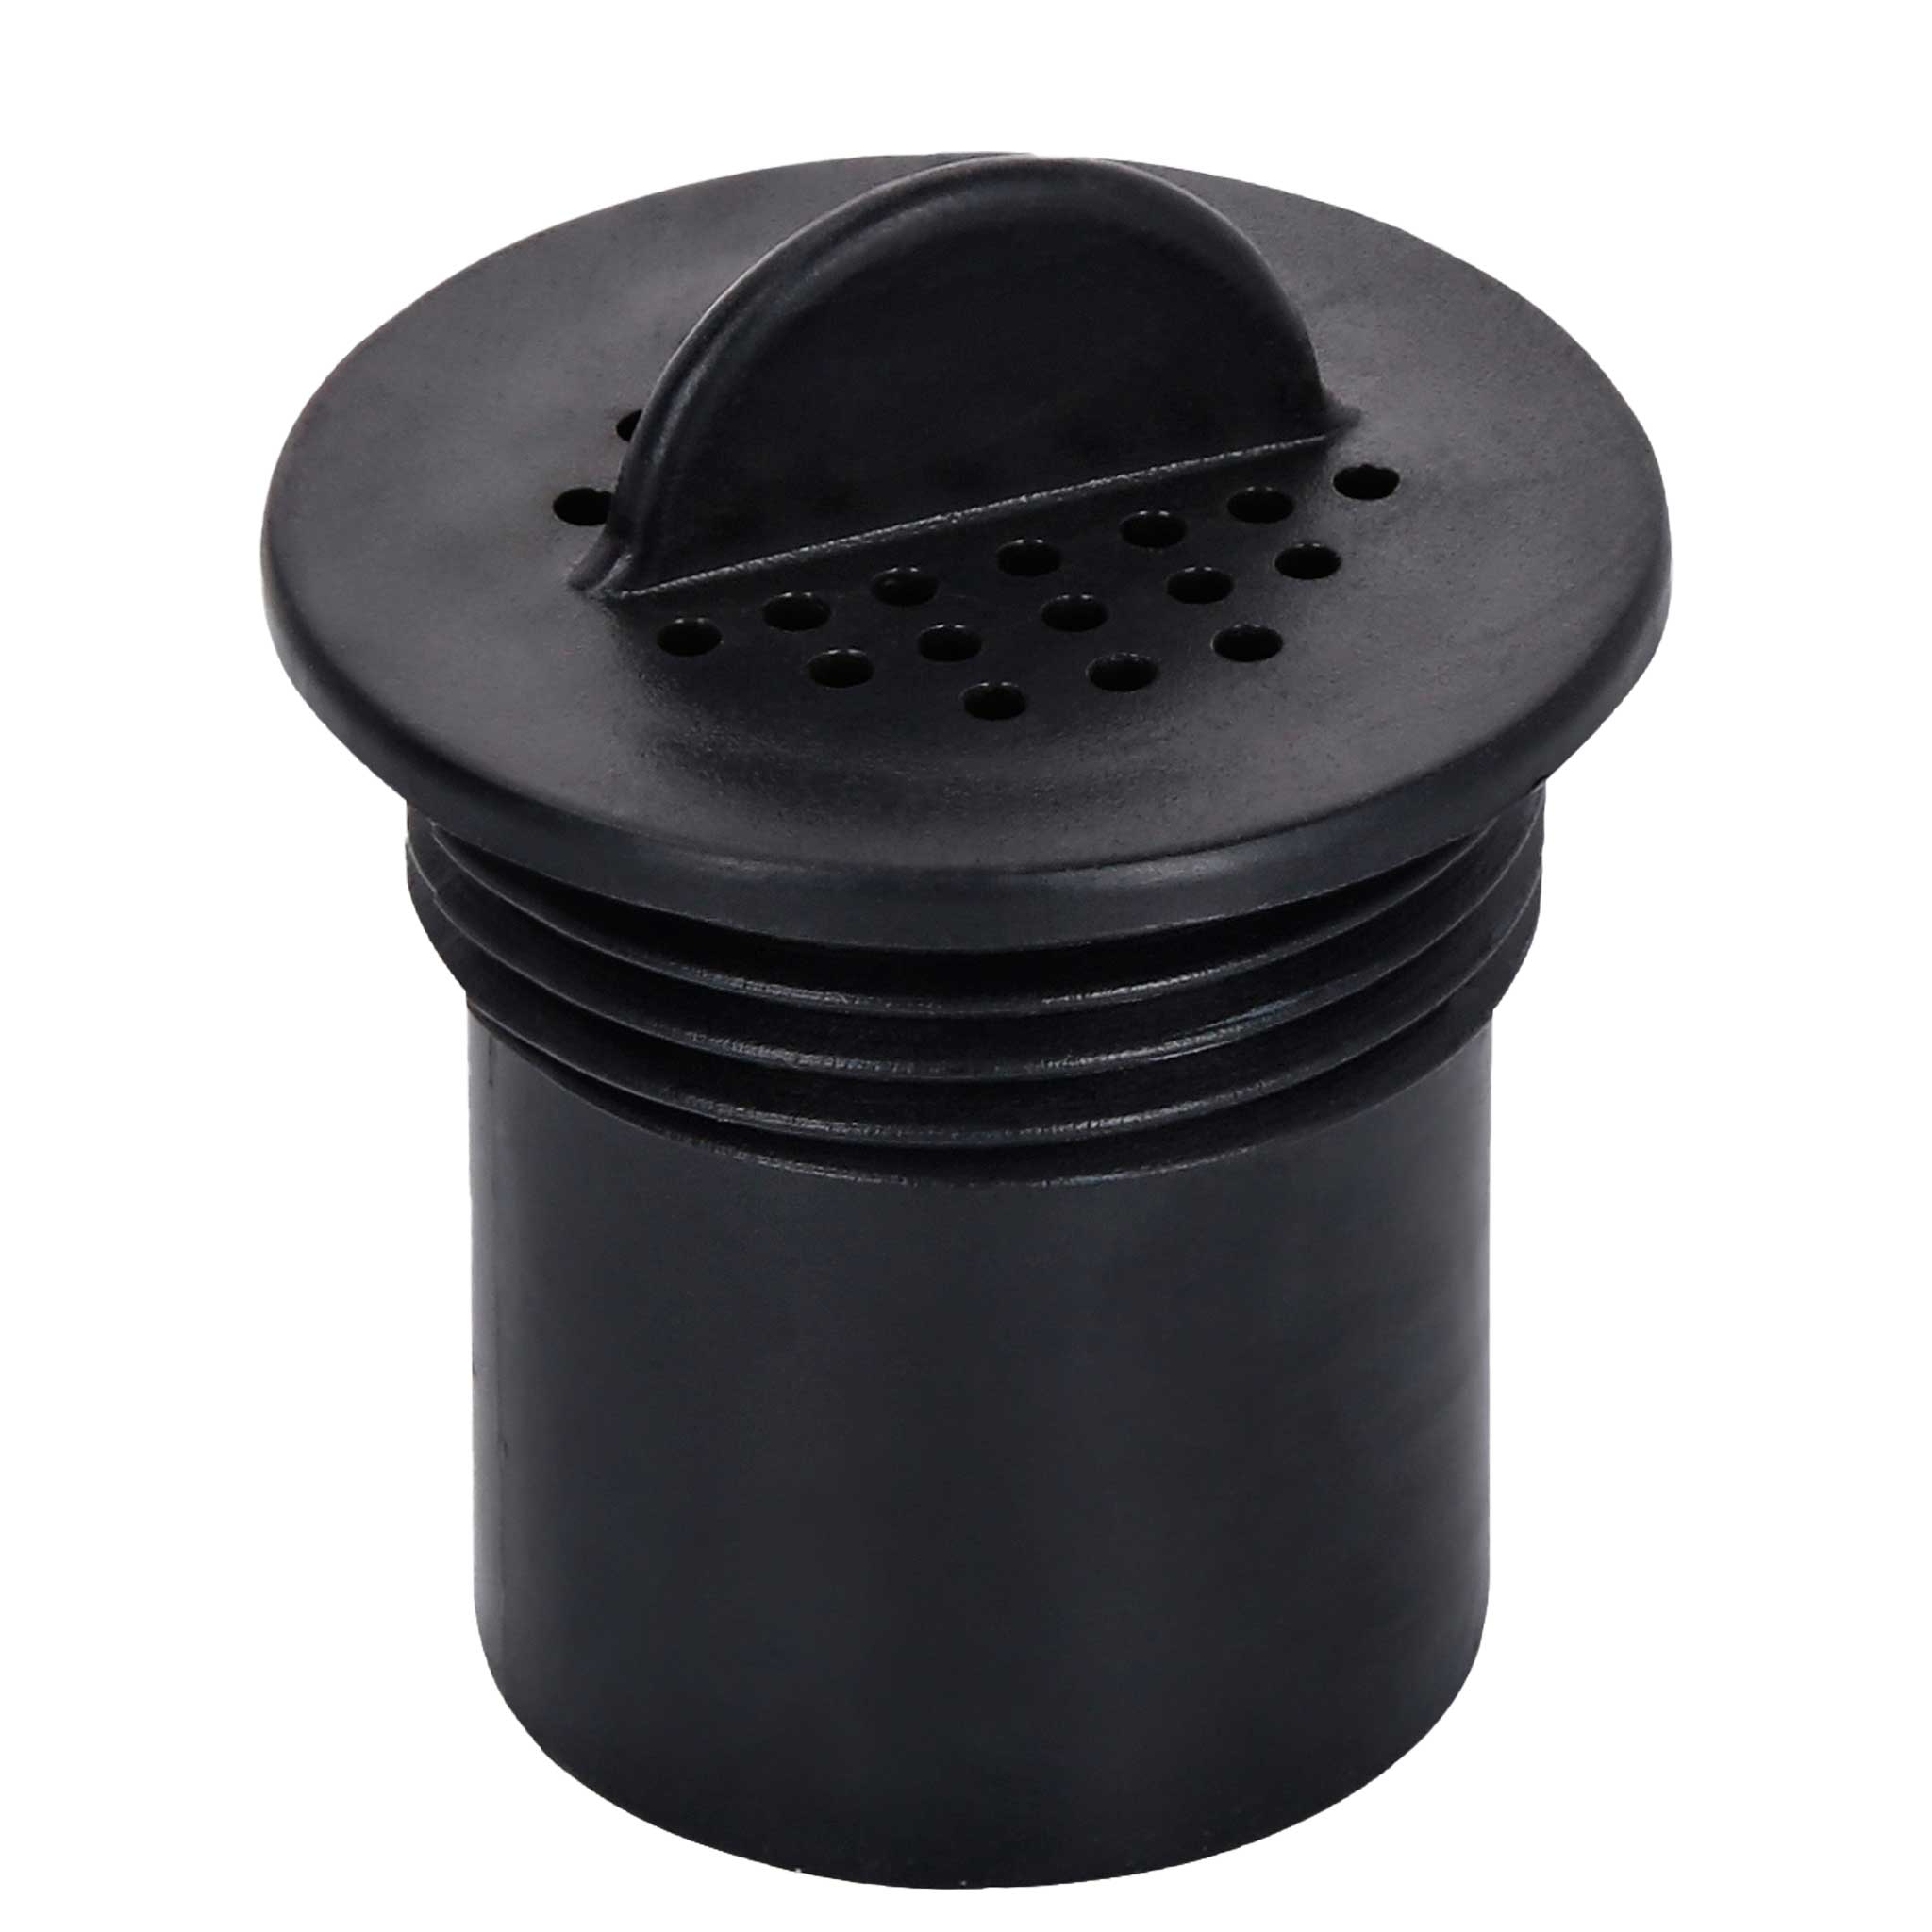 Haier Activated Wine Cellar Carbon Filter